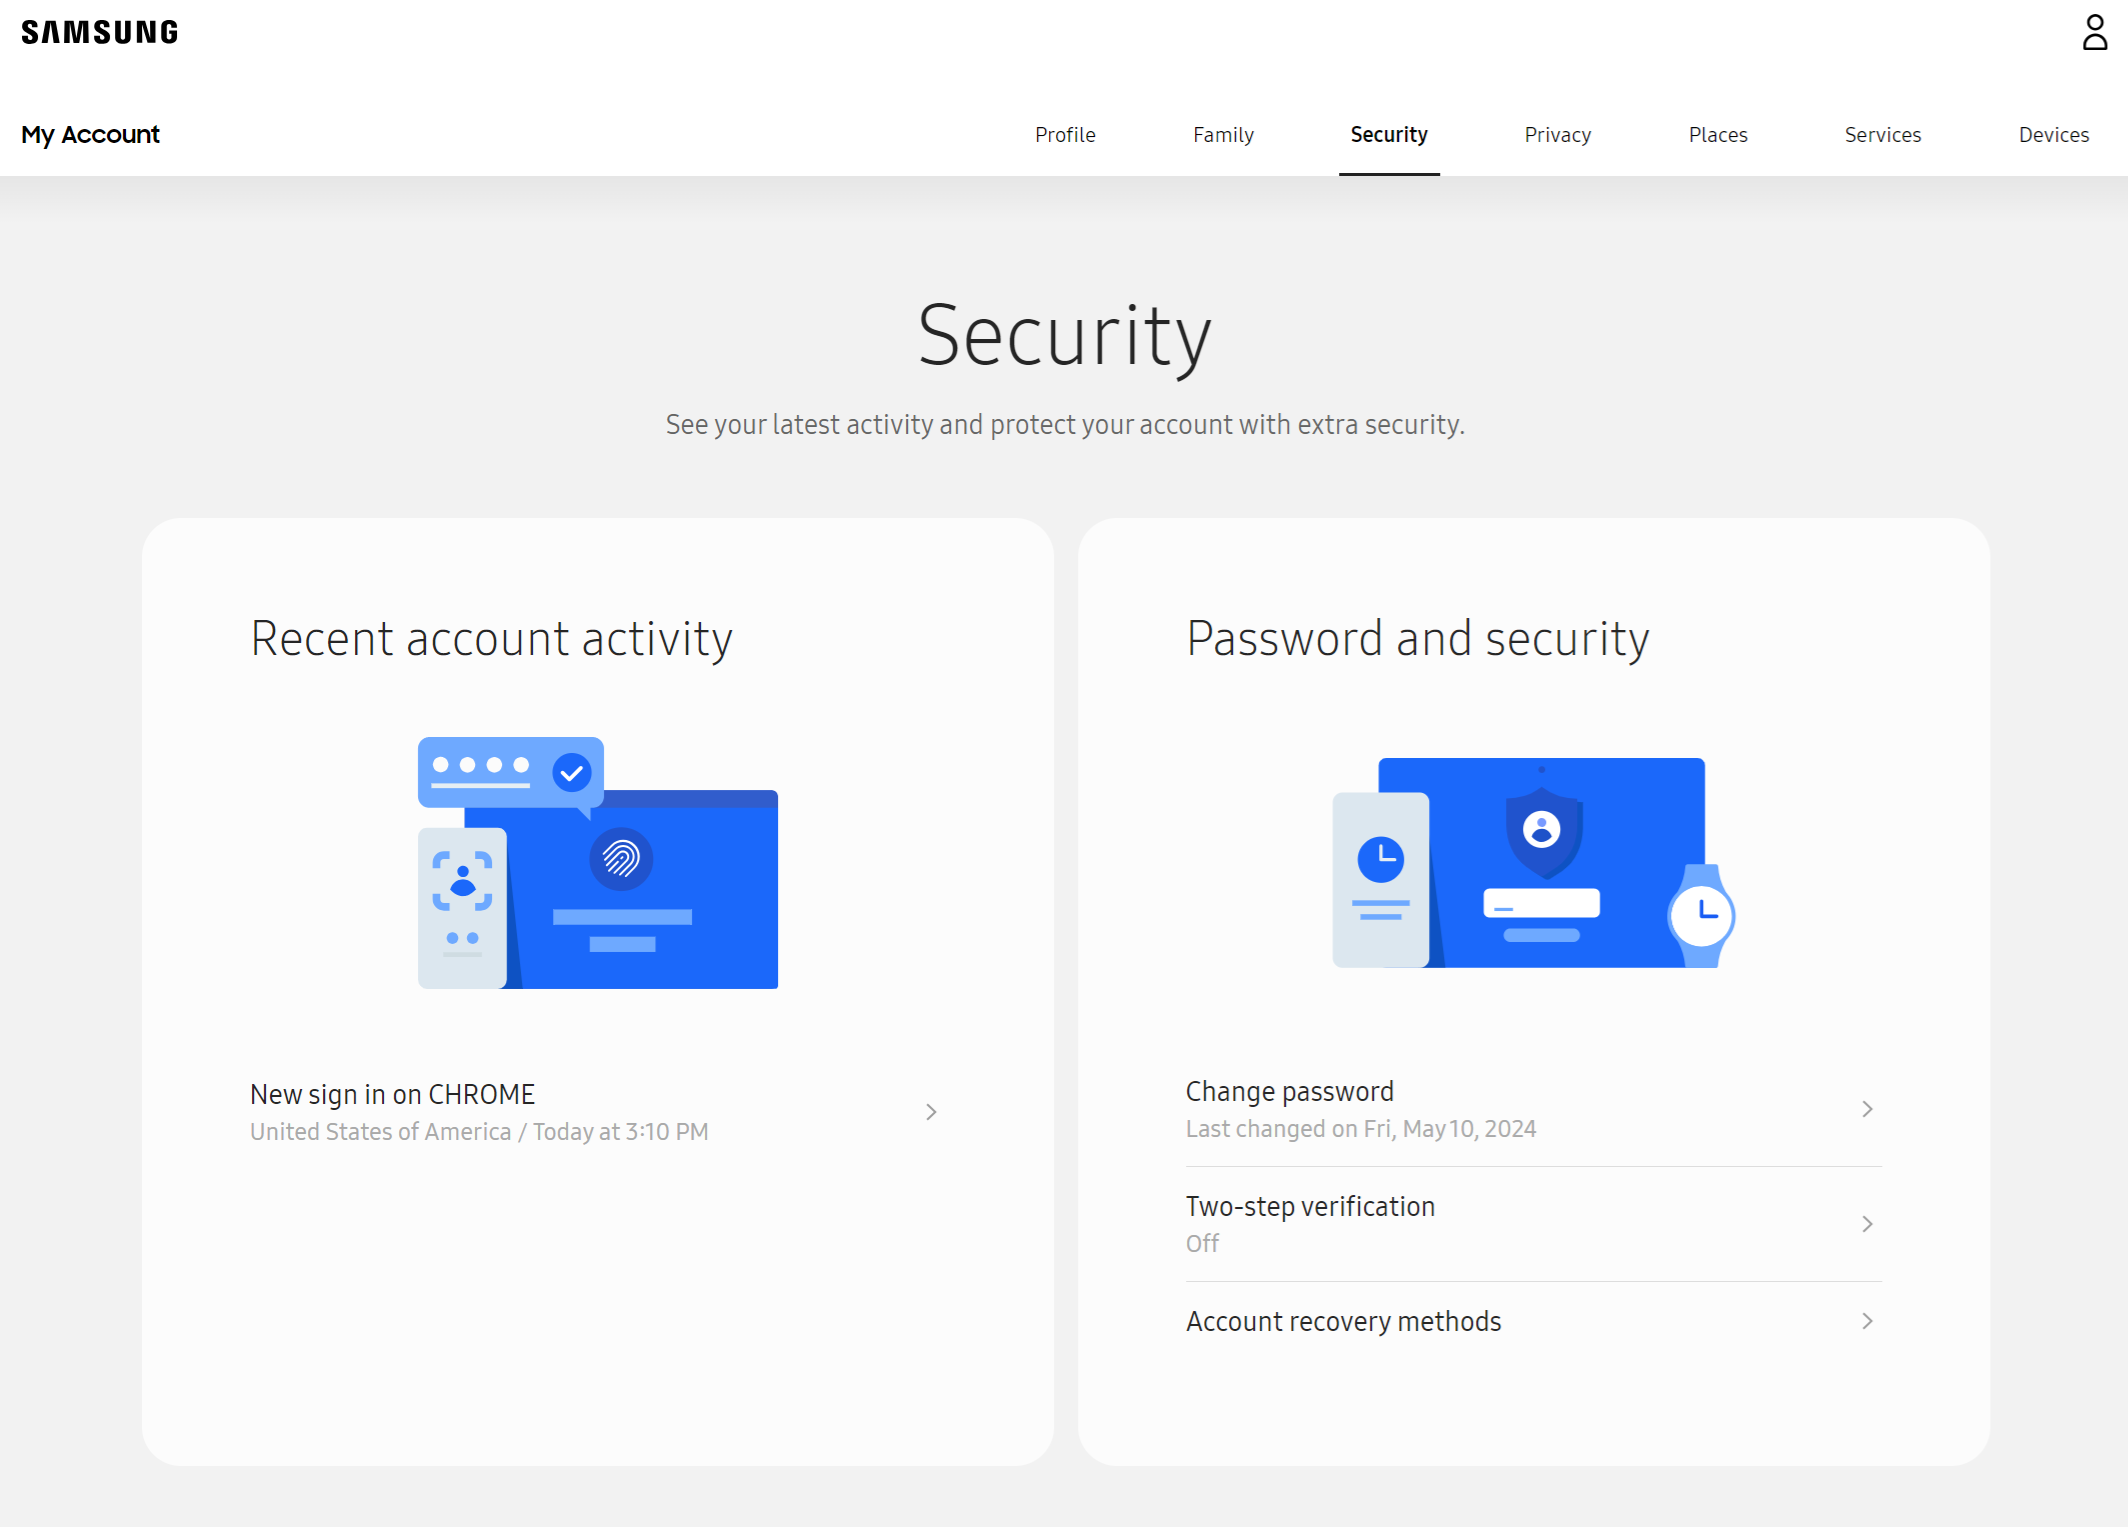 My Account Security page.